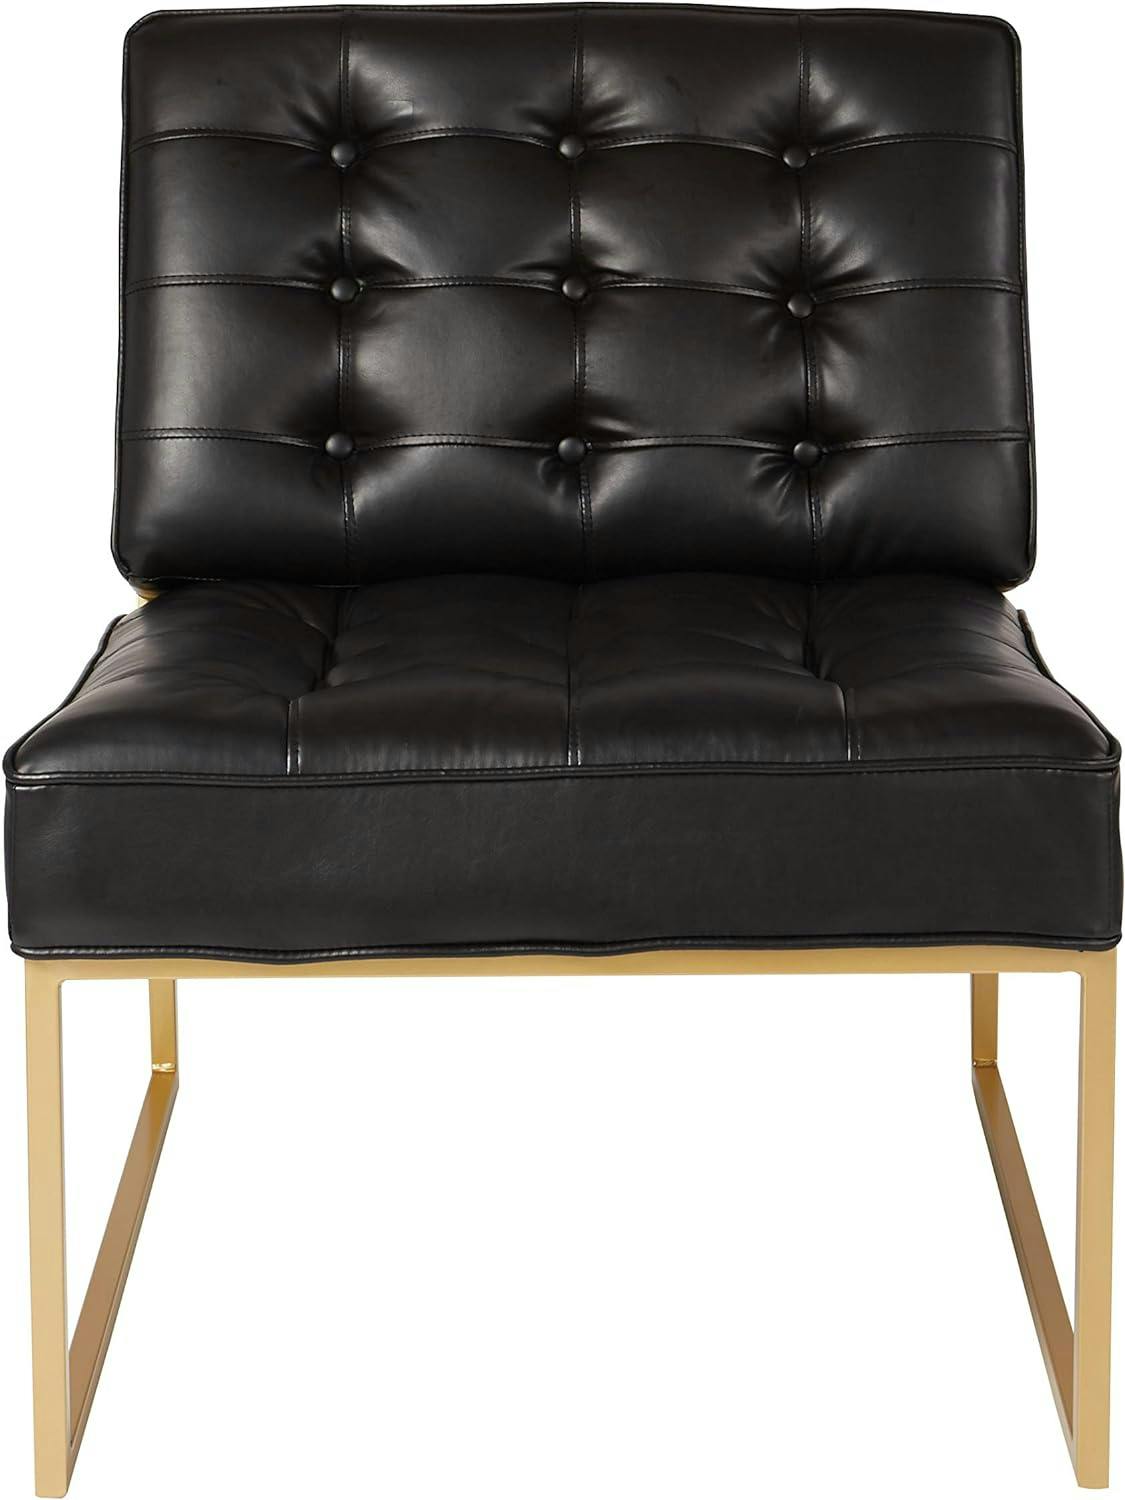 Transitional Anthony Black Faux Leather Chair with Gold Metal Frame